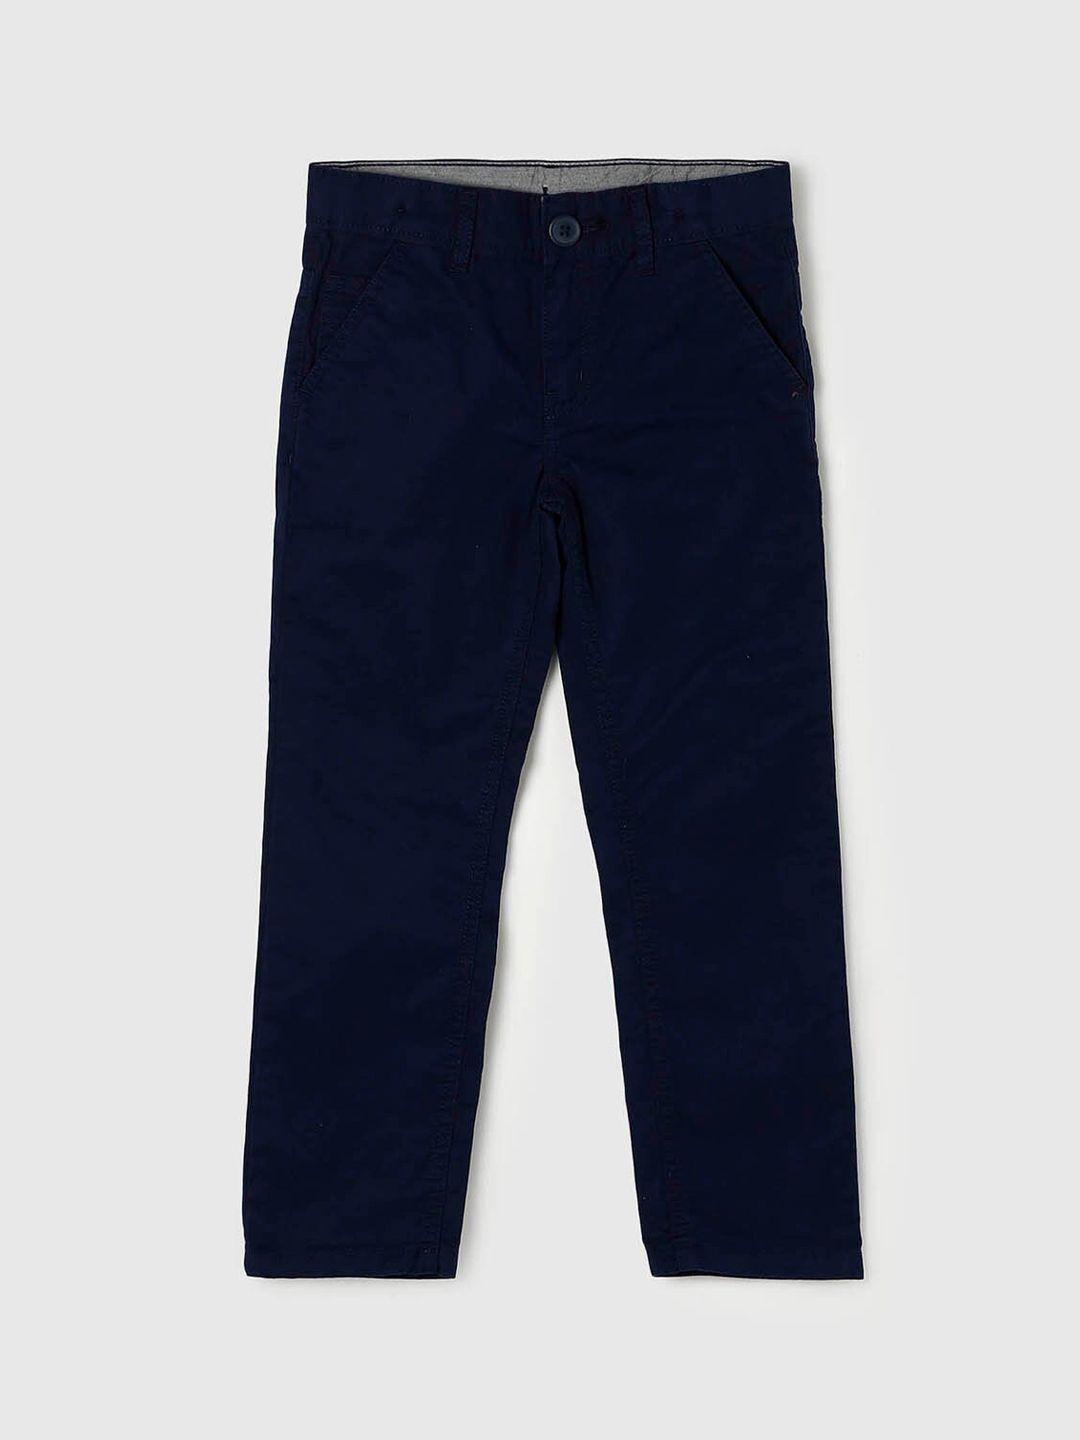 max boys blue chinos cotton trousers